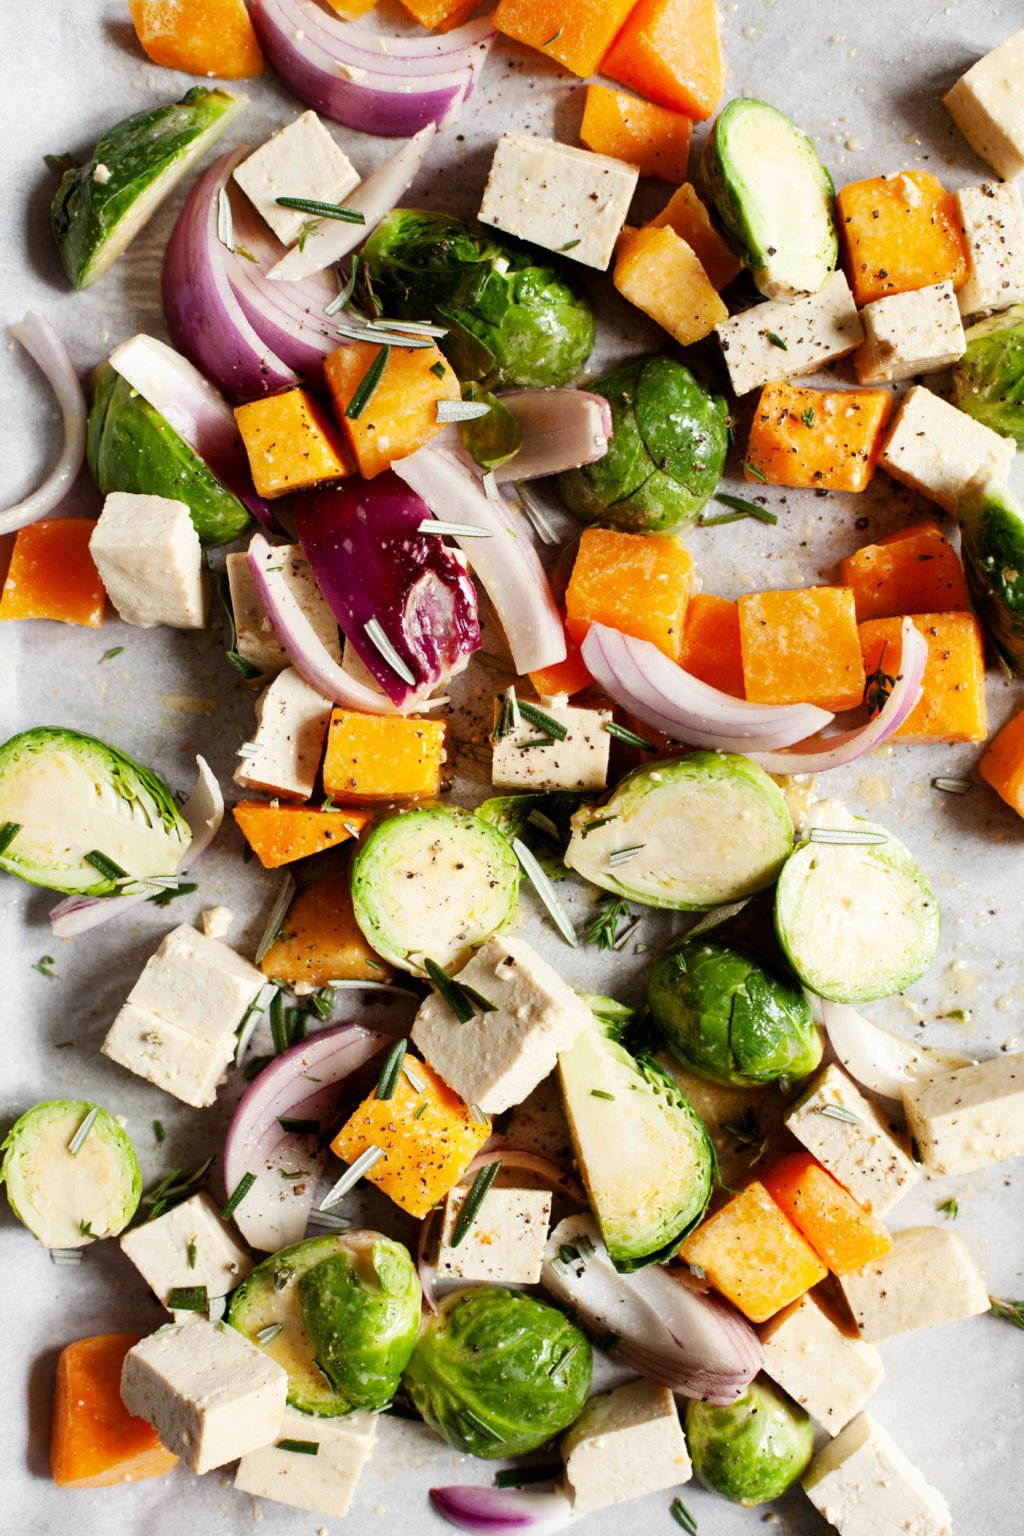 A sheet pan covered with autumn vegetables and tofu, ready for baking.